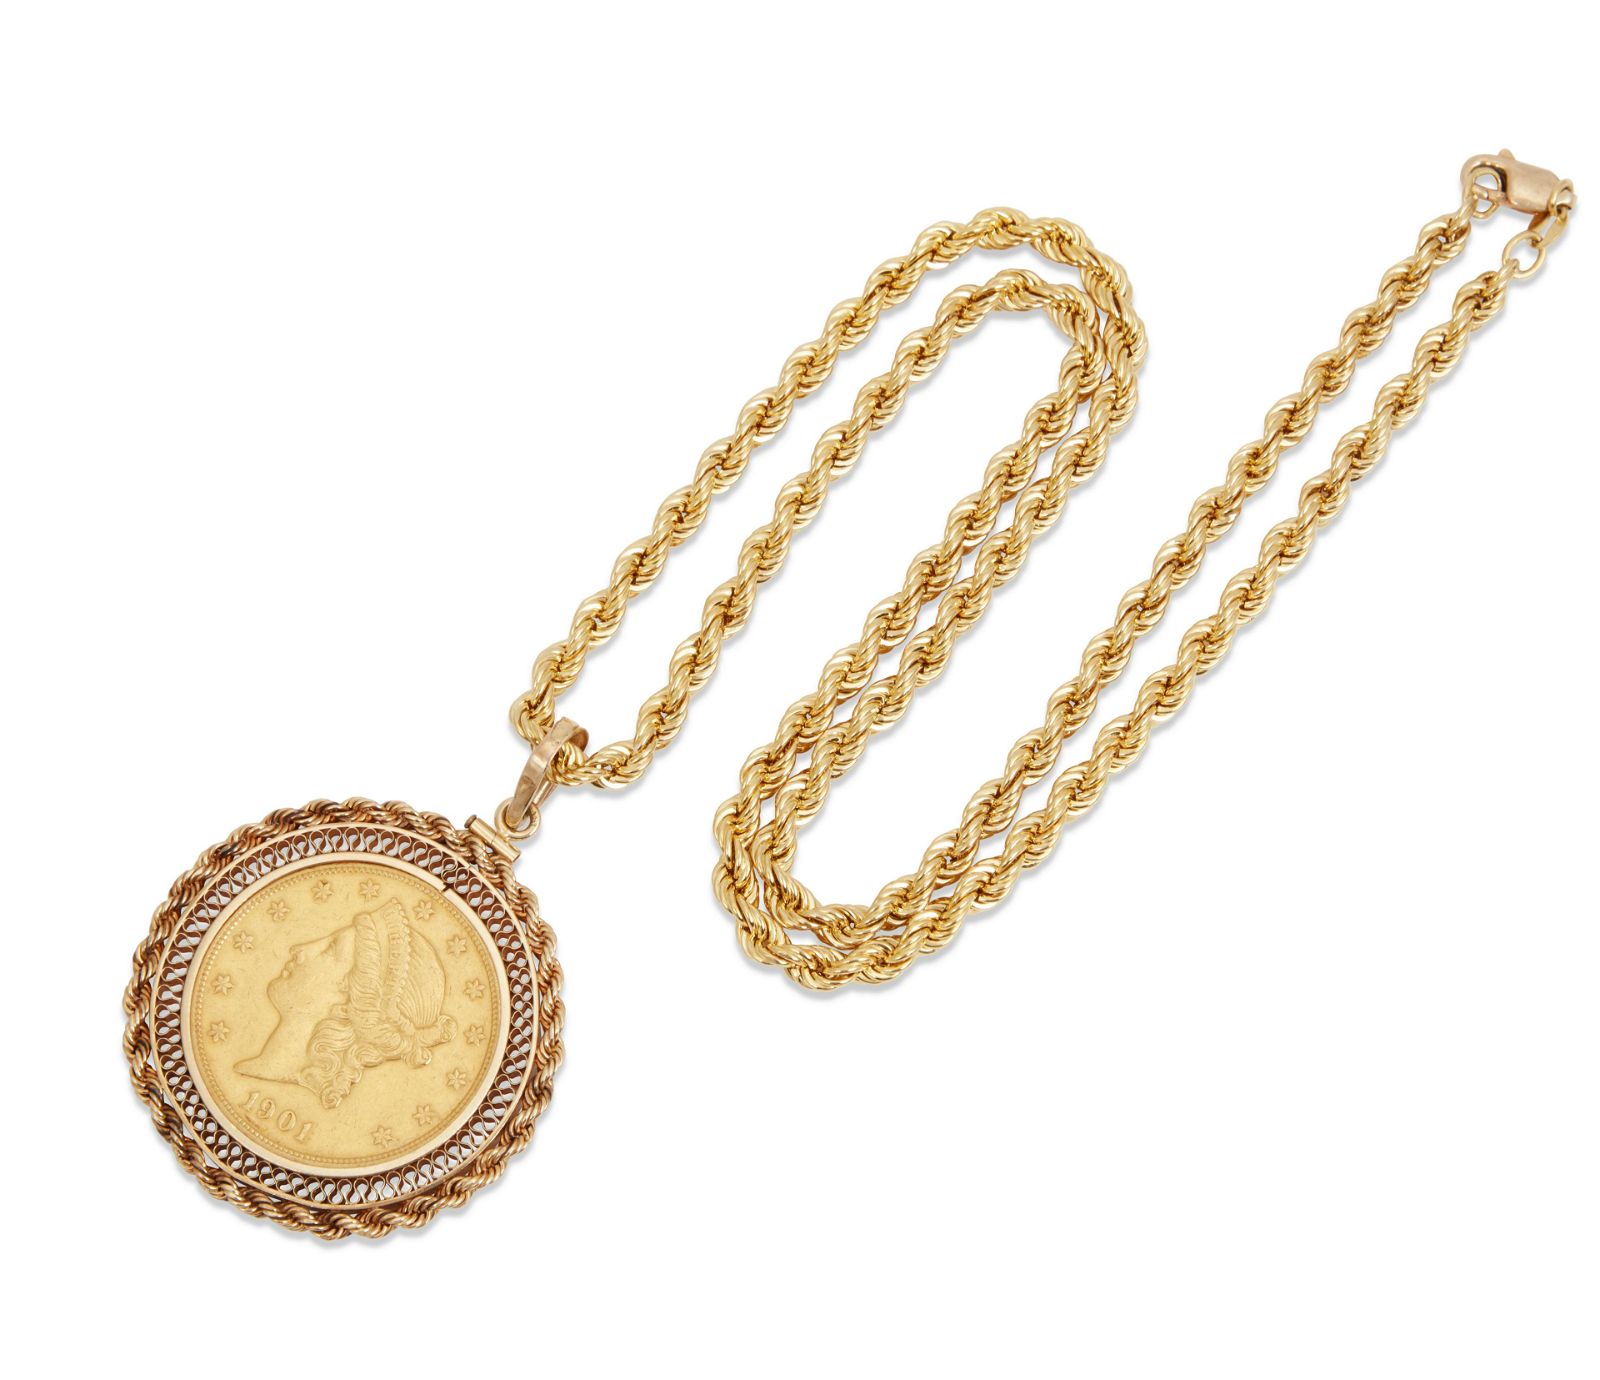 AN AMERICAN GOLD COIN PENDANT AND